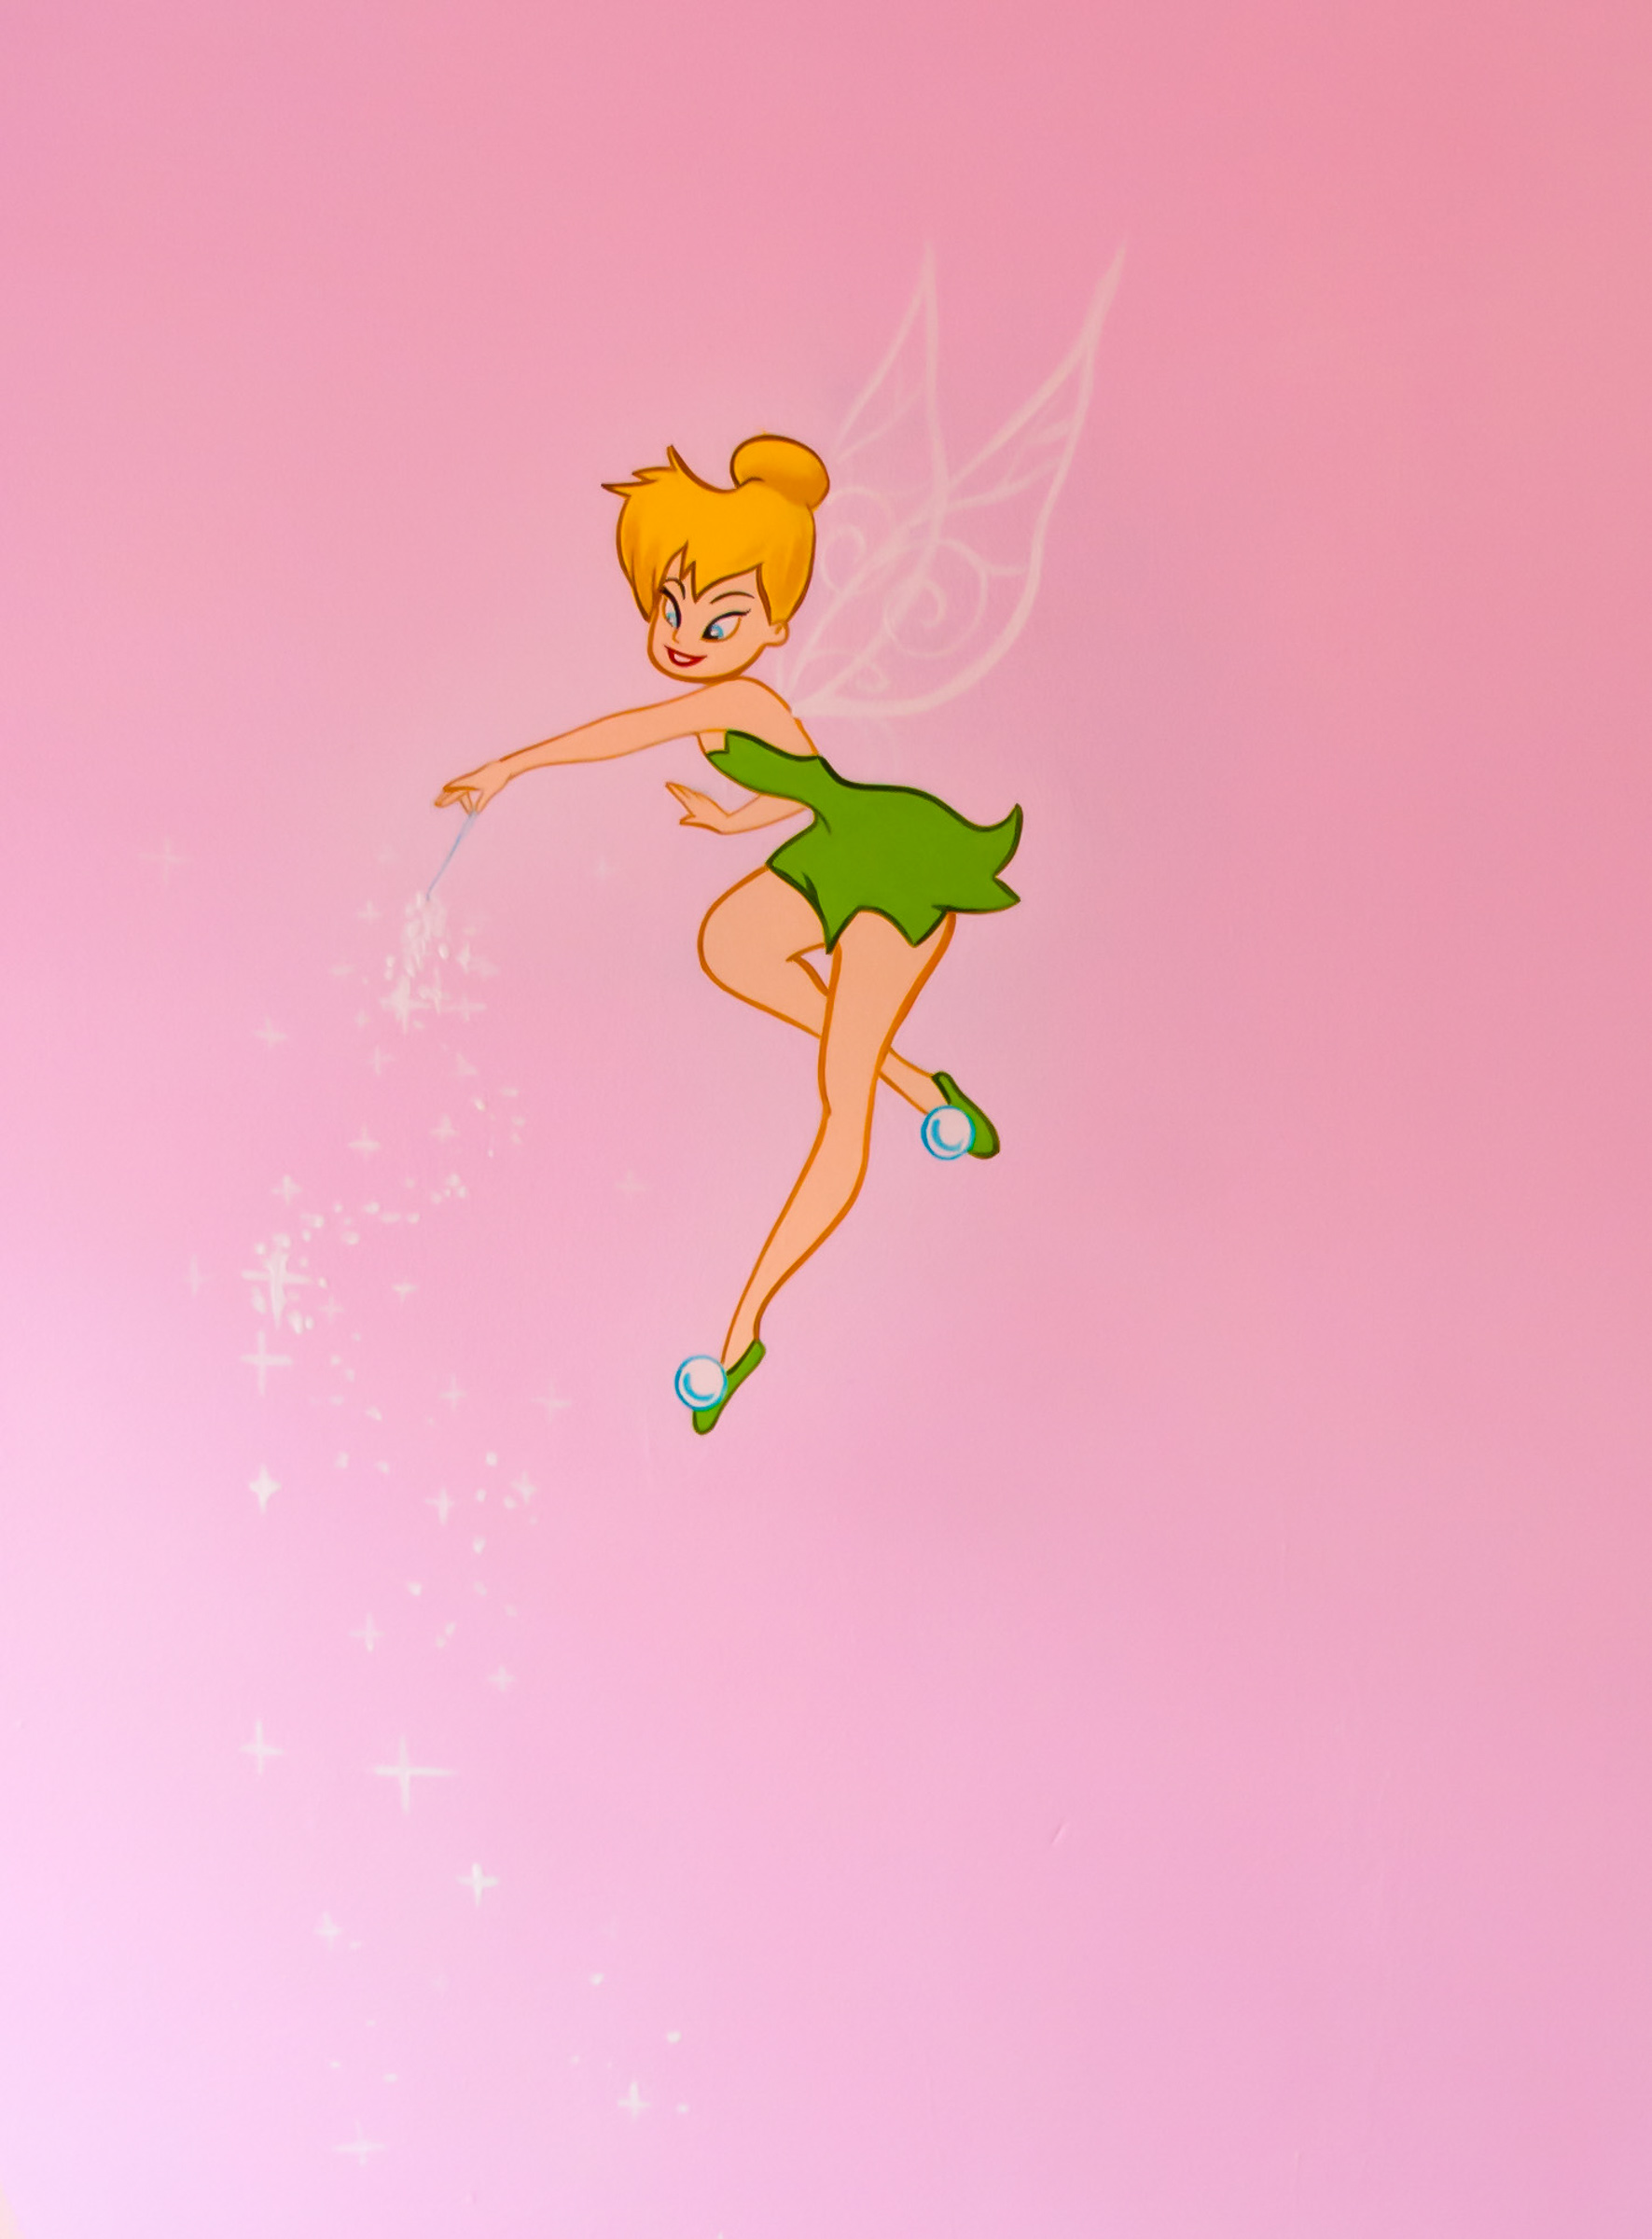 Tinkerbell waving some fairy dust into the room